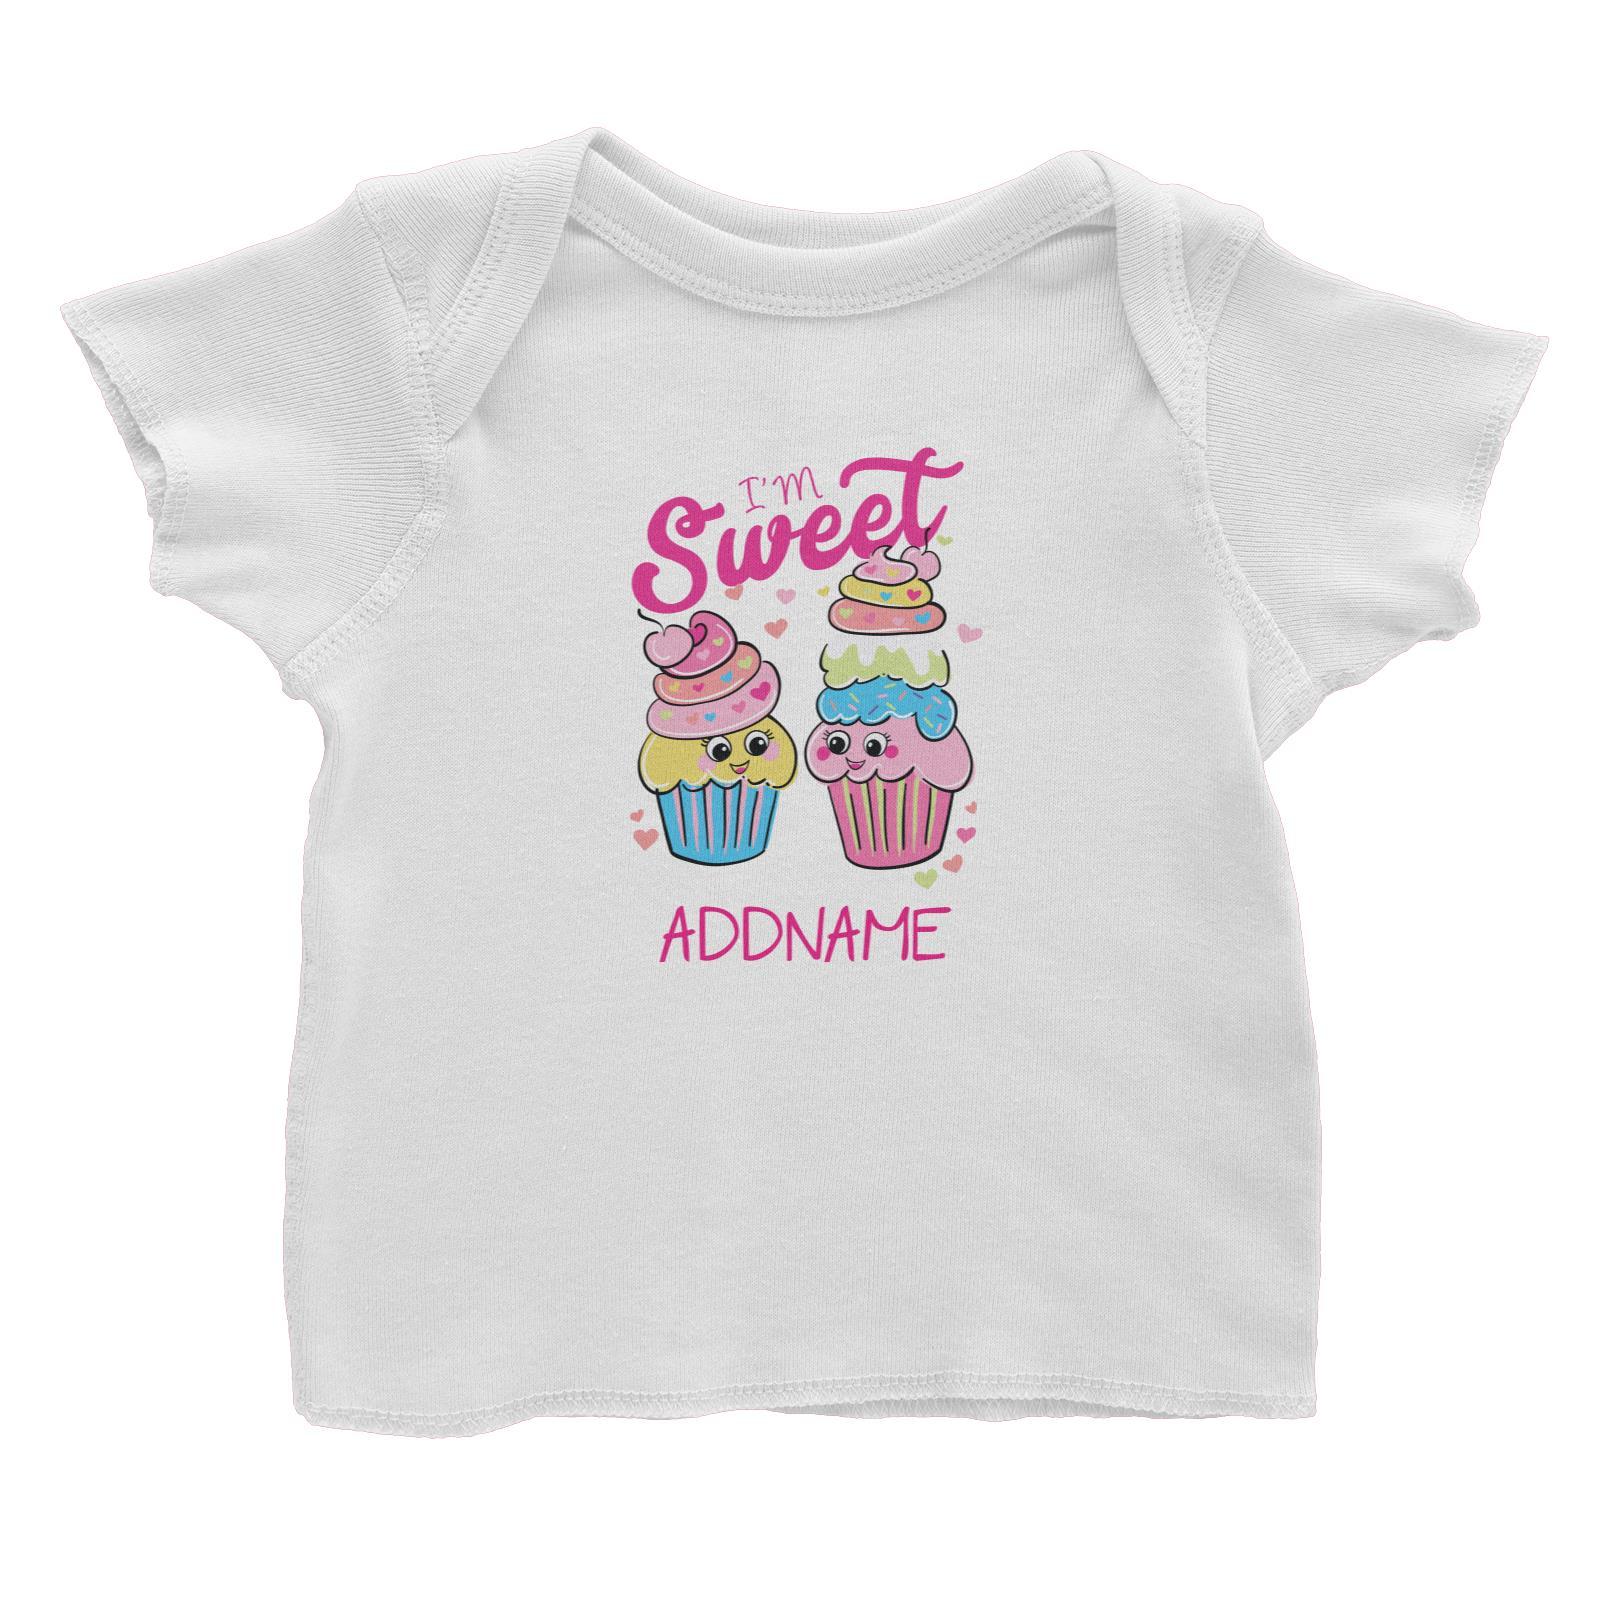 Cool Vibrant Series I'm Sweet Cupcakes Addname Baby T-Shirt